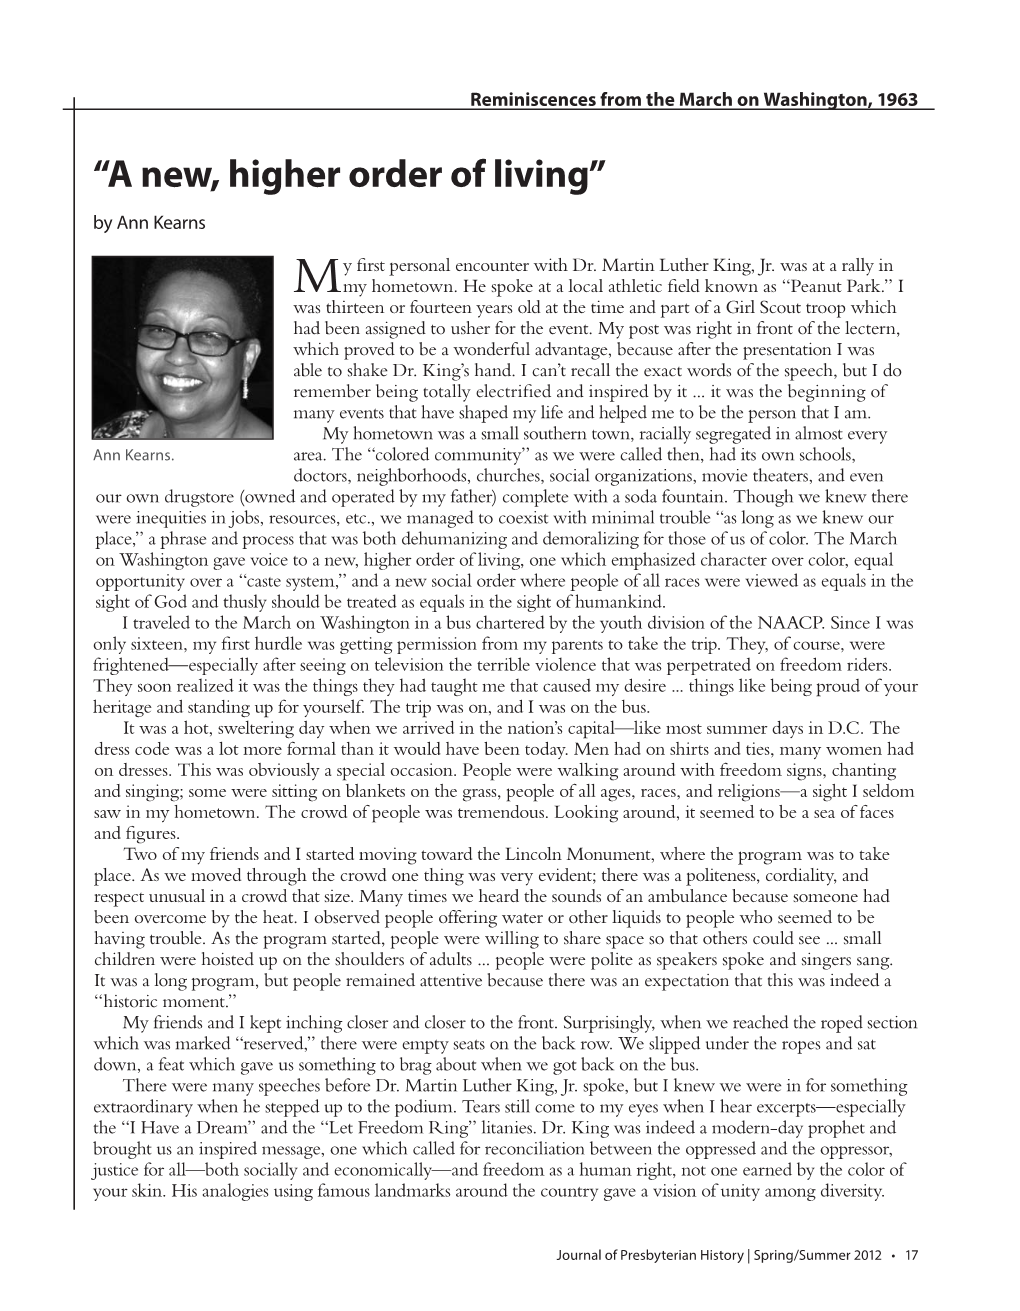 “A New, Higher Order of Living” by Ann Kearns